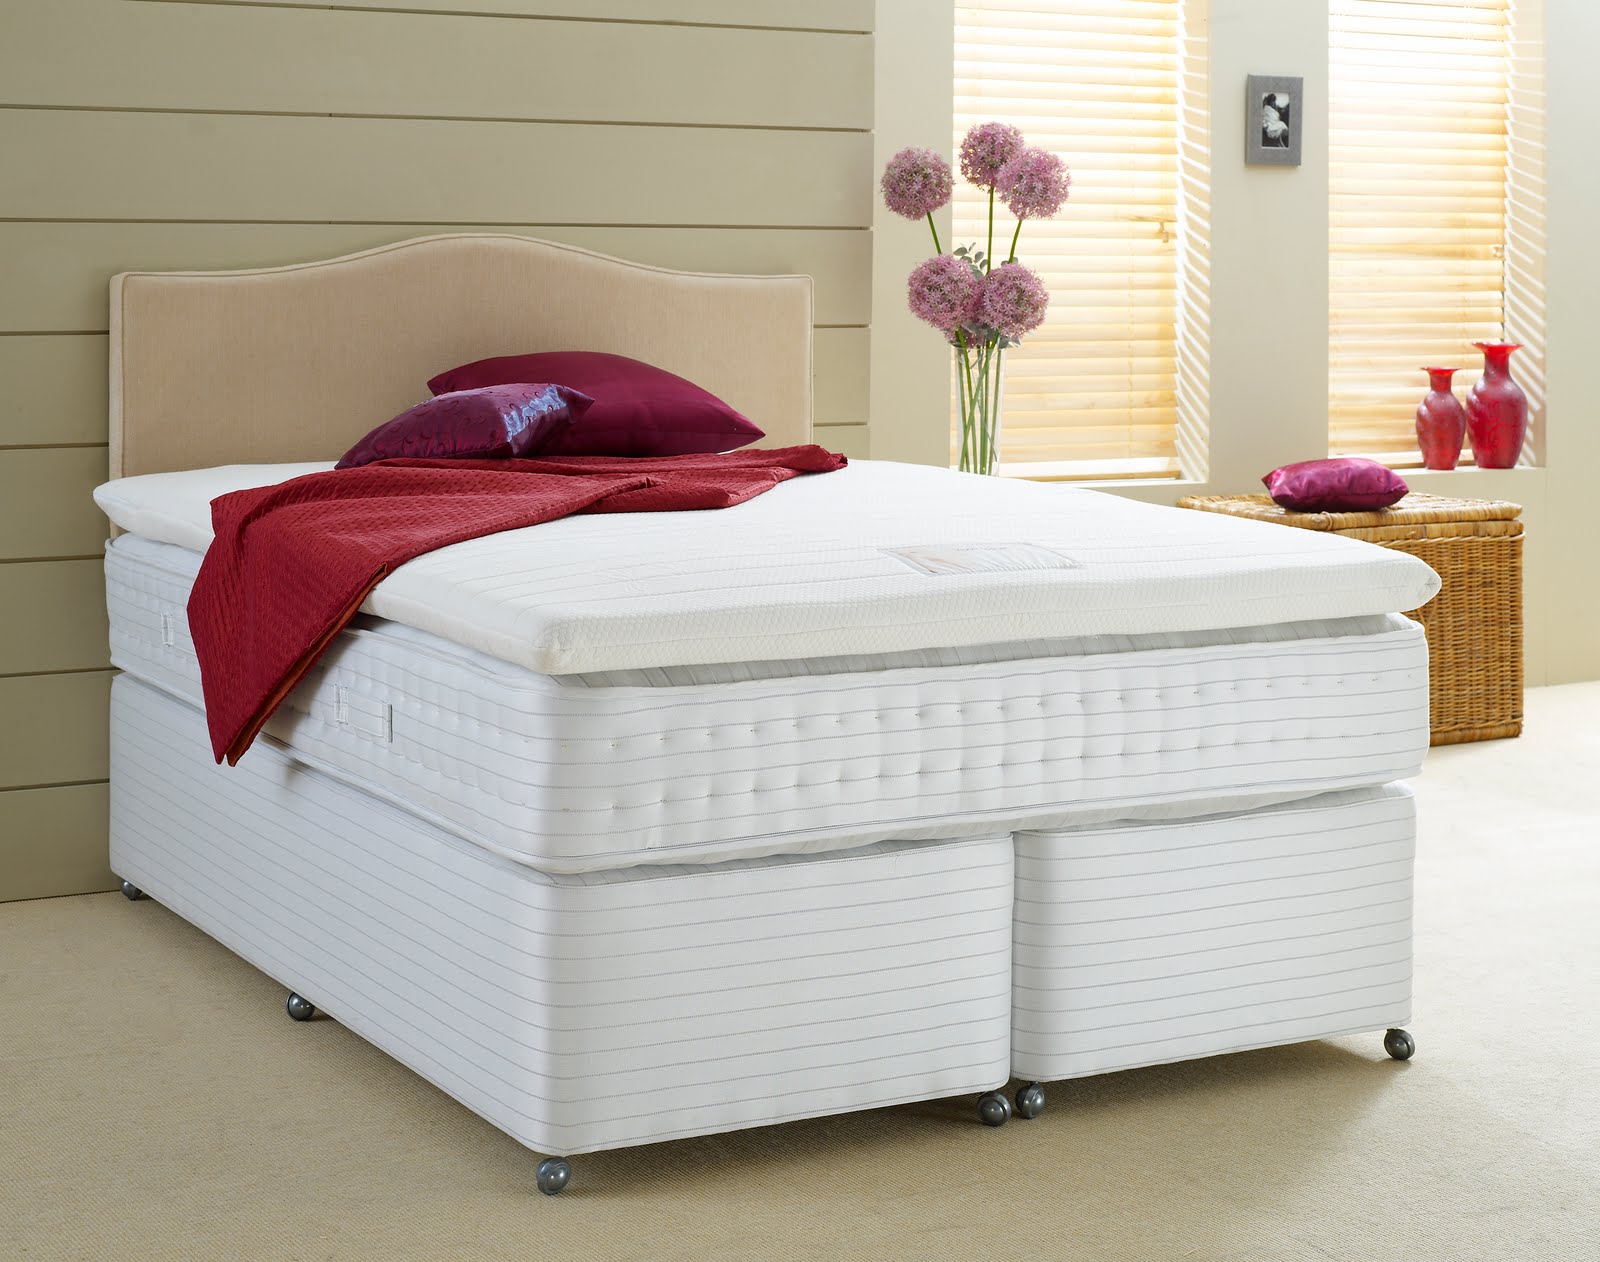 types of bed mattress